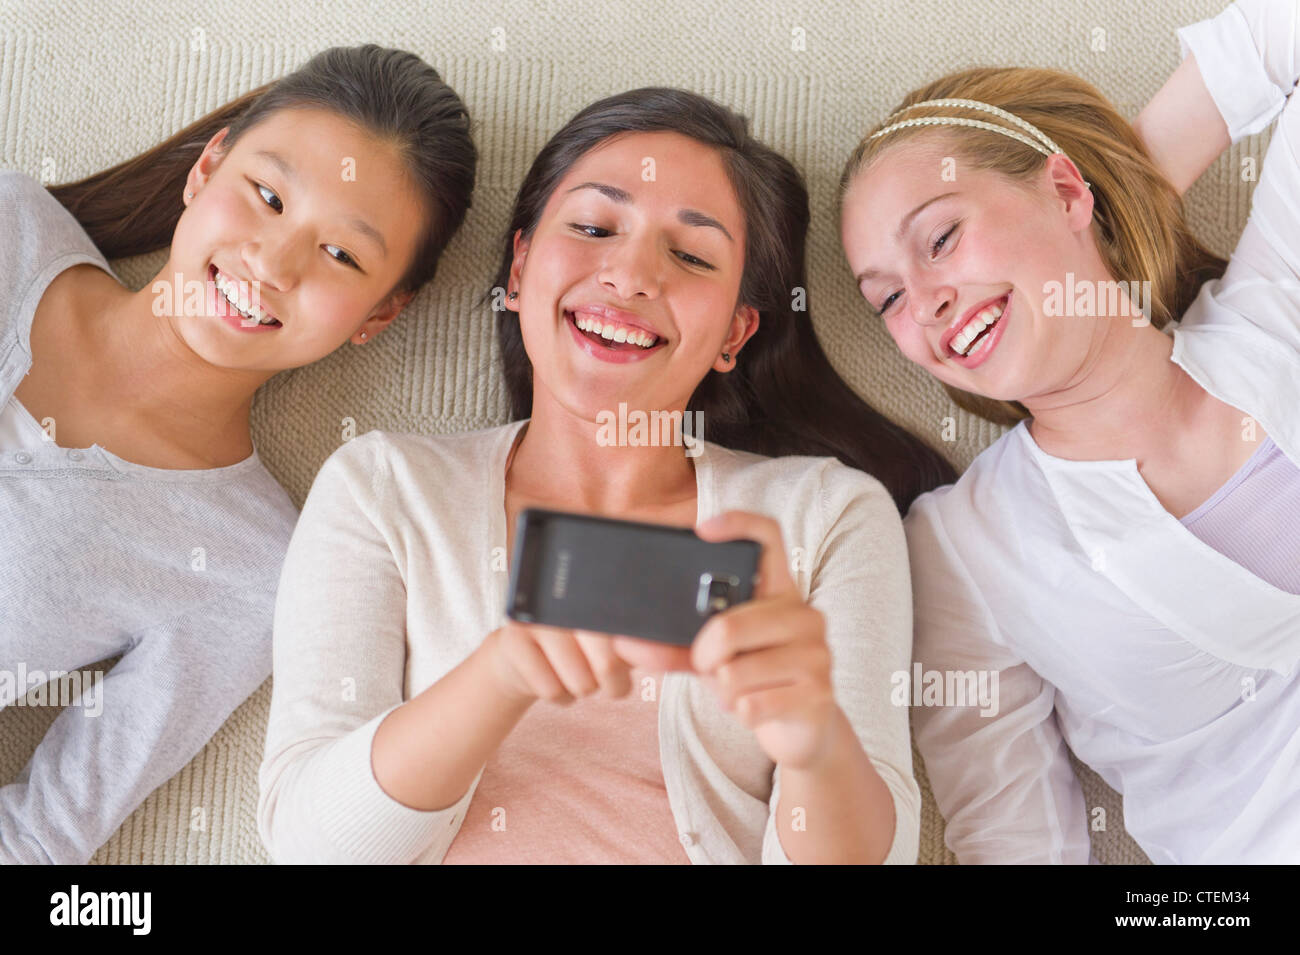 USA, New Jersey, Jersey City, les amis (14-19) lying on floor looking at mobile phone Banque D'Images